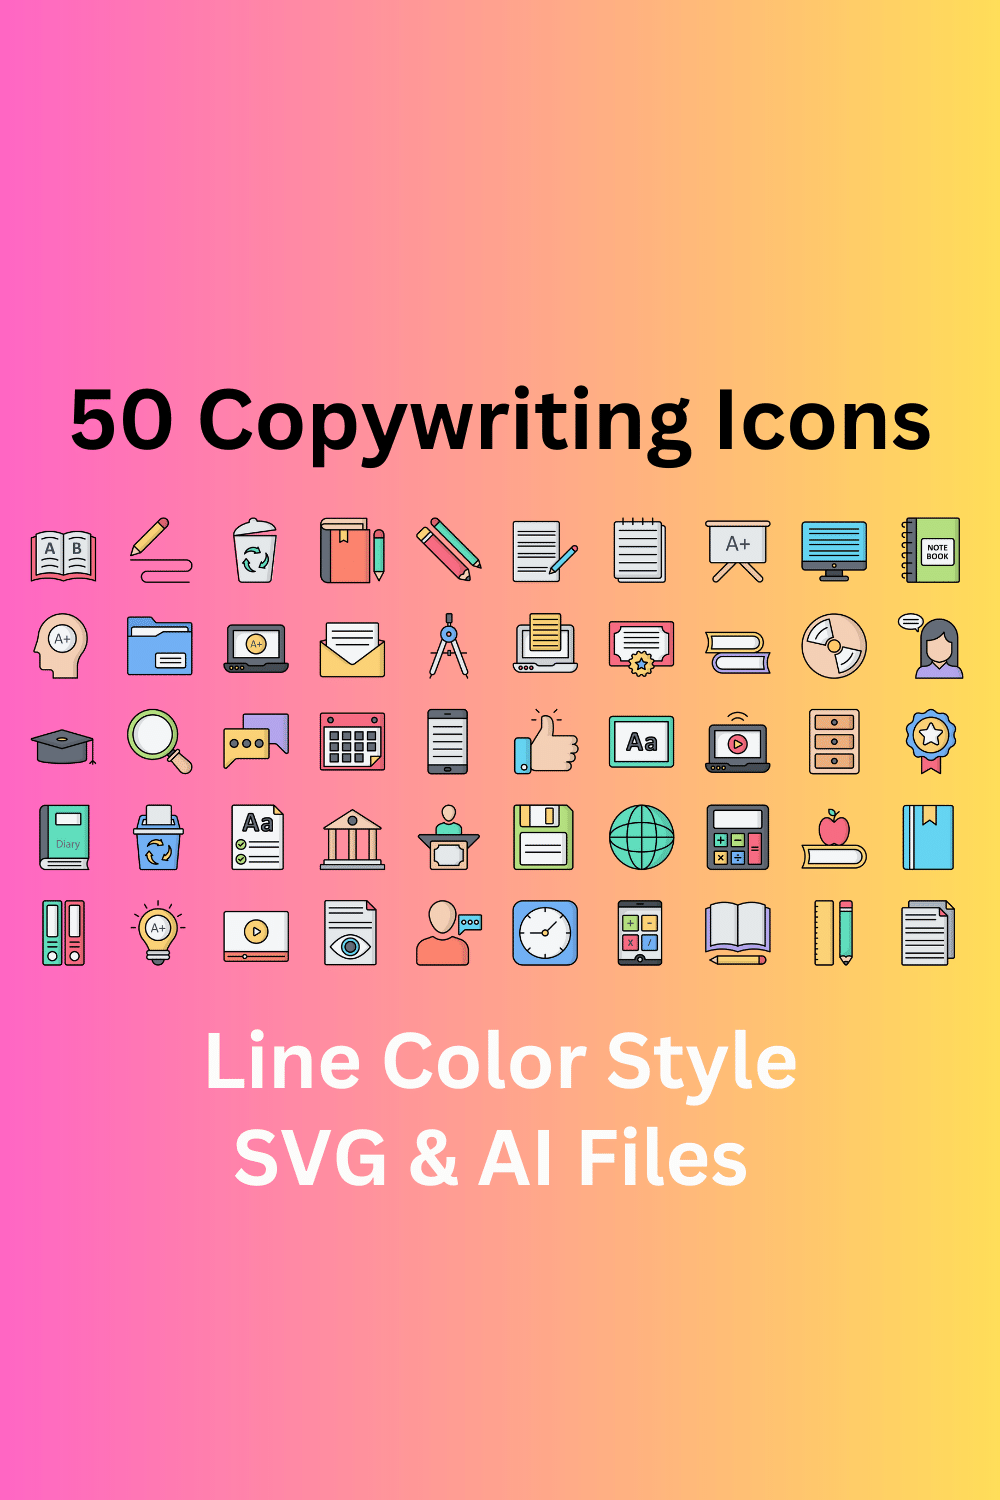 Copywriting Icon Set 50 Line Color Icons - SVG And AI Files pinterest preview image.